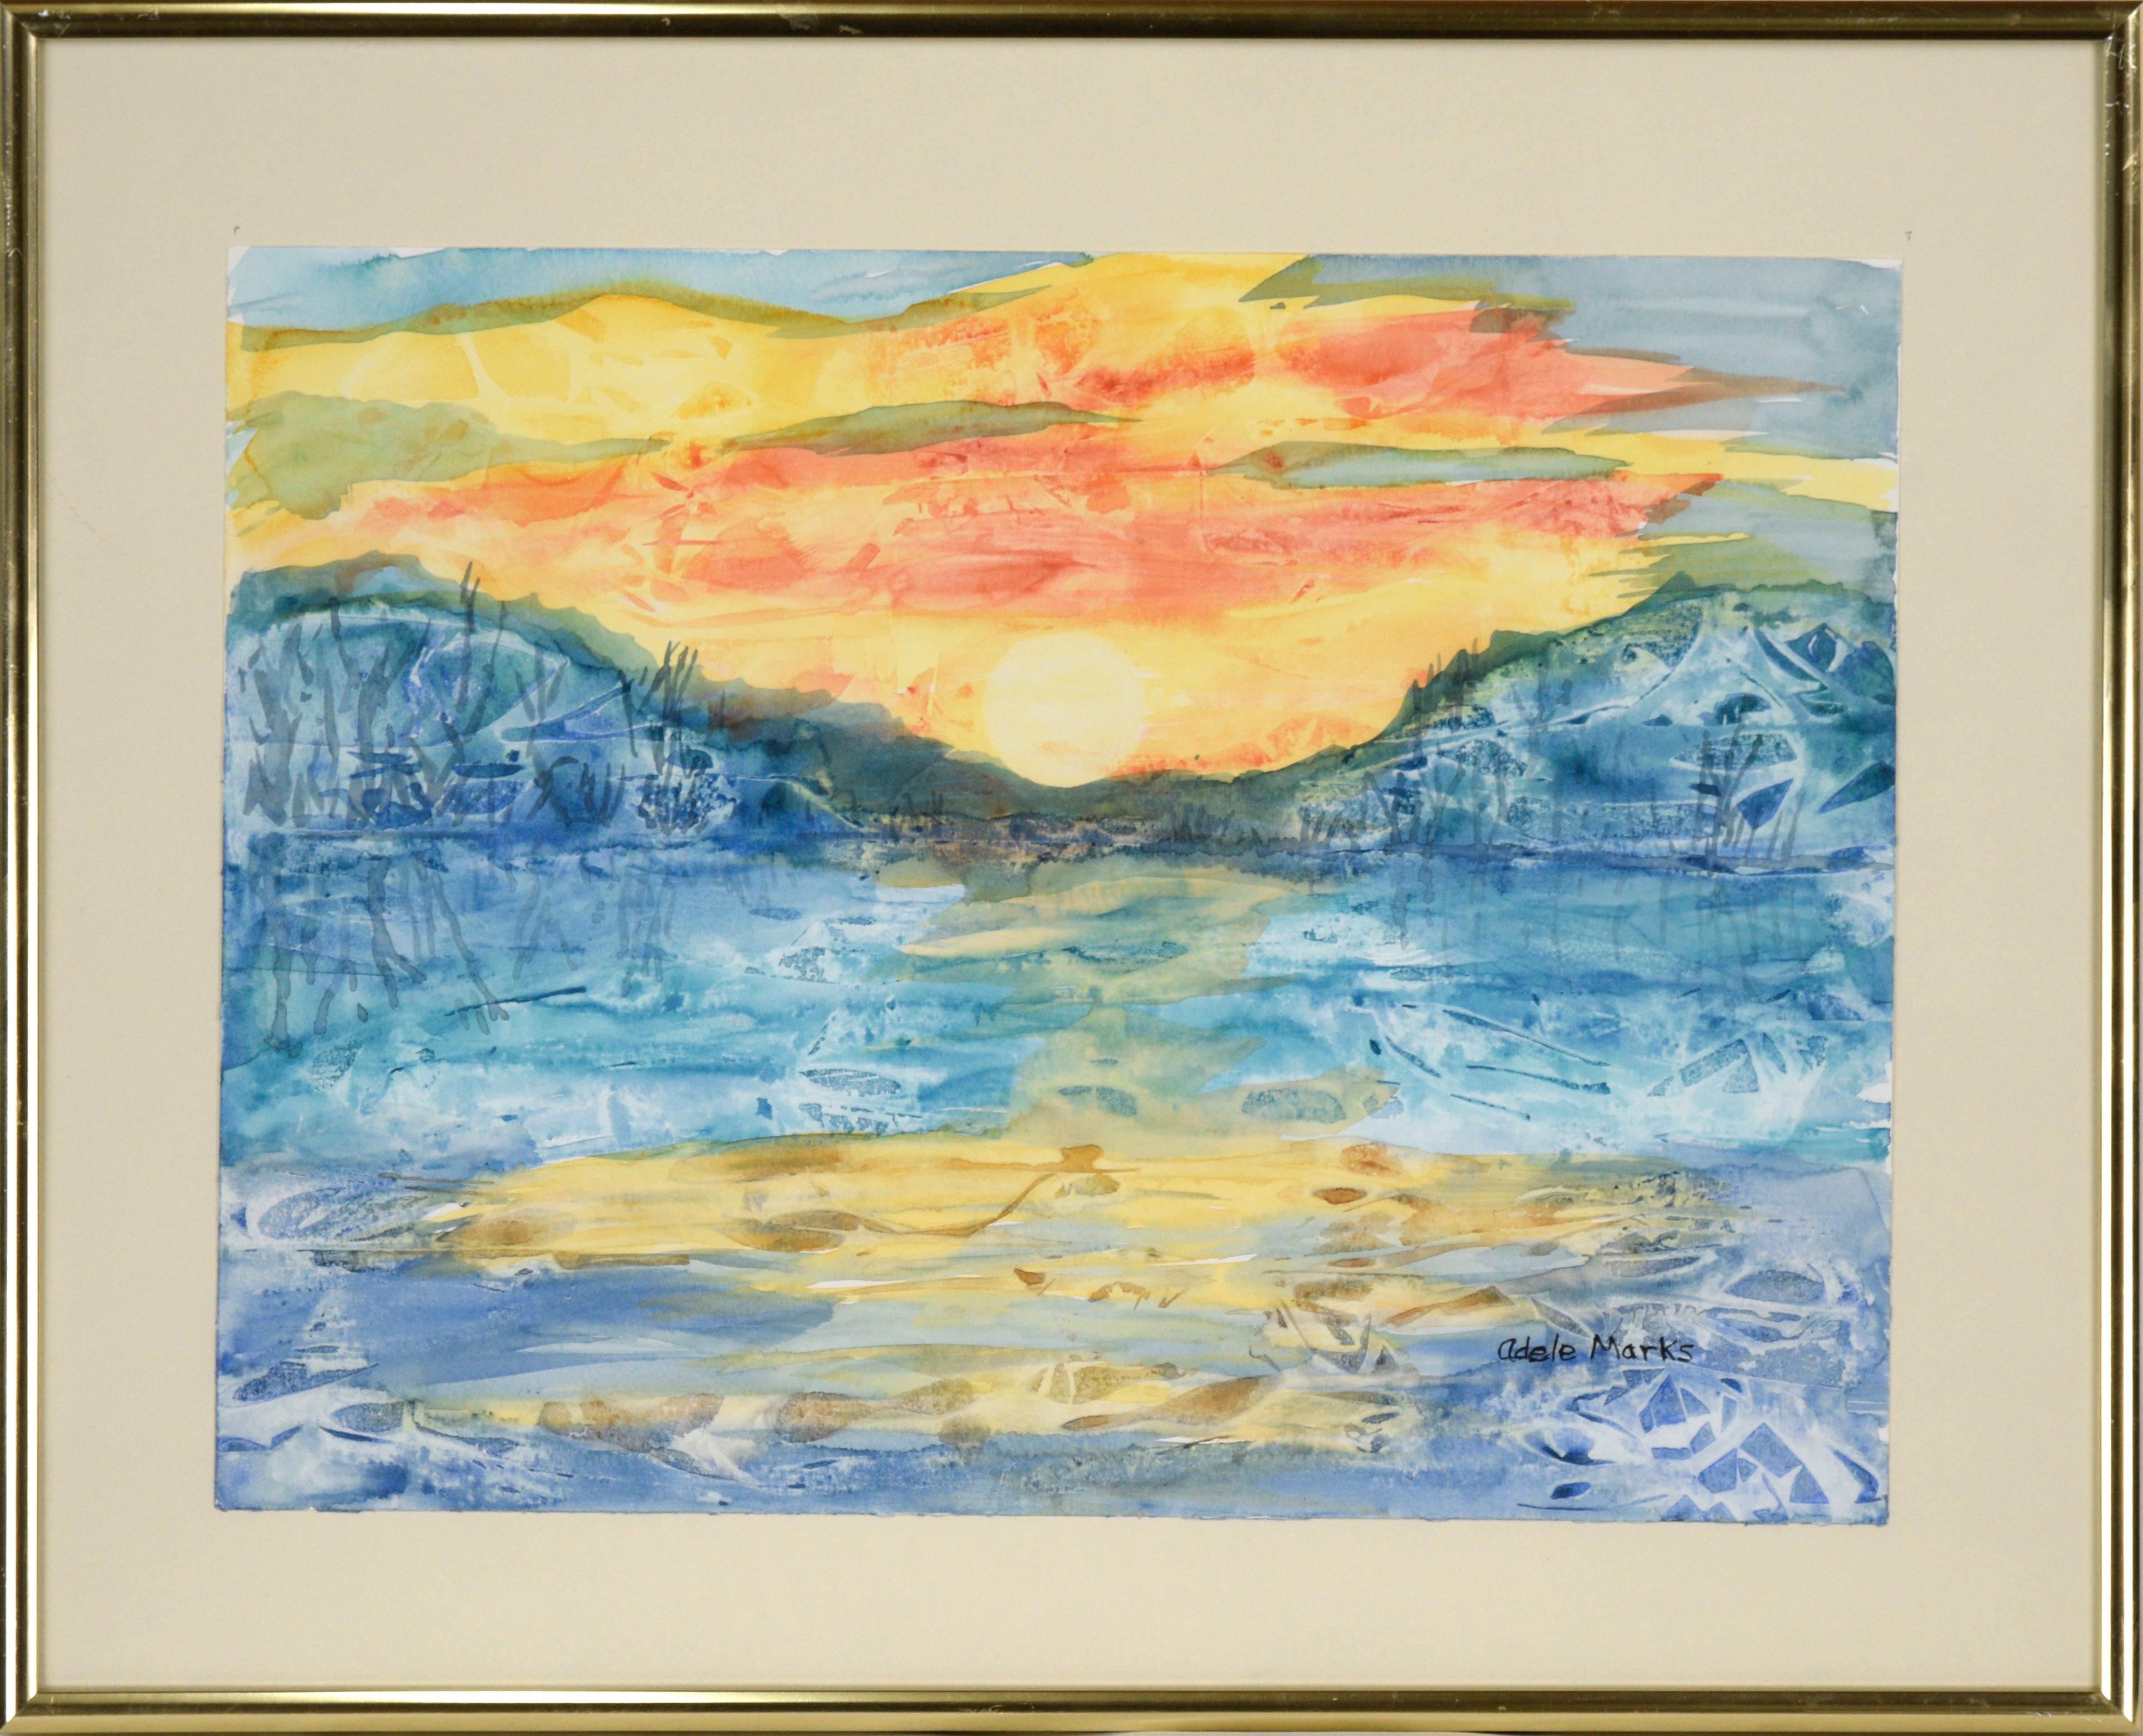 Adele Marks Landscape Art - Fiery Sunset Over the Lake - Abstracted Landscape